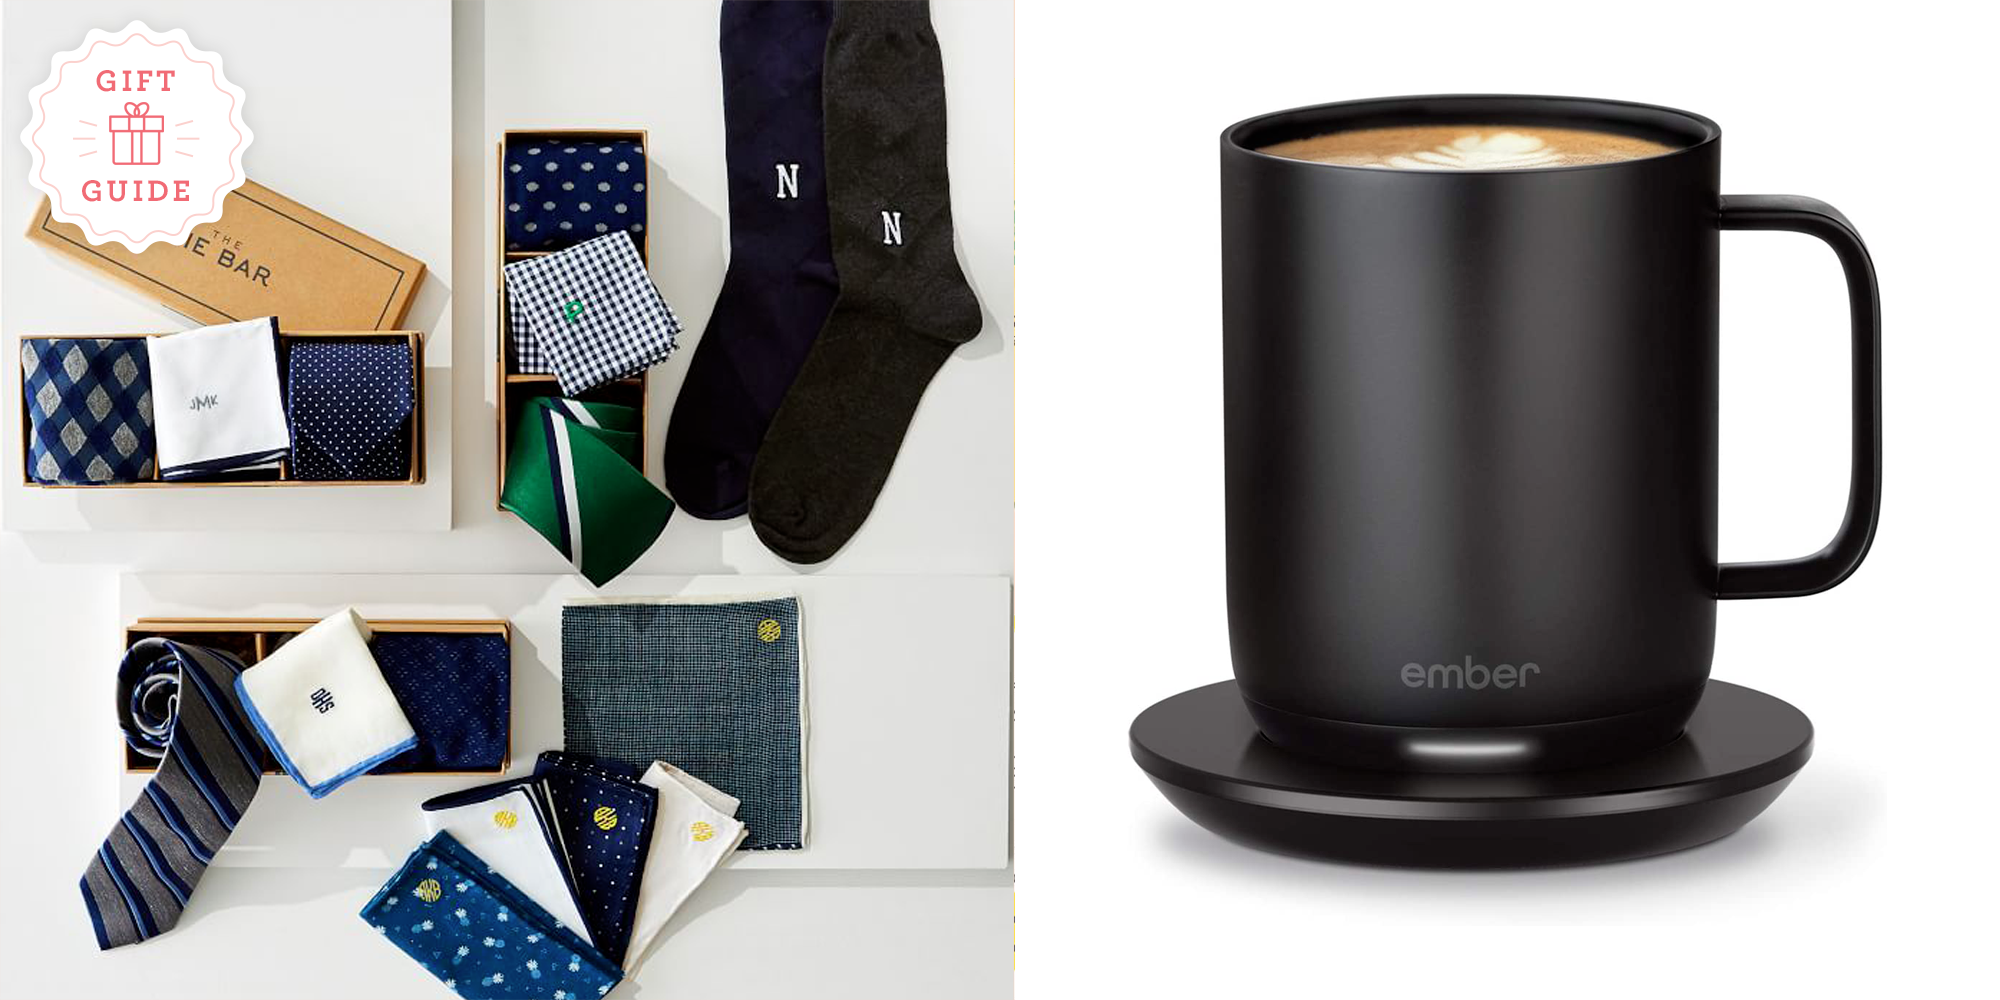 Father's Day Gifts: The Best Ideas For Under $15, $25 & $50